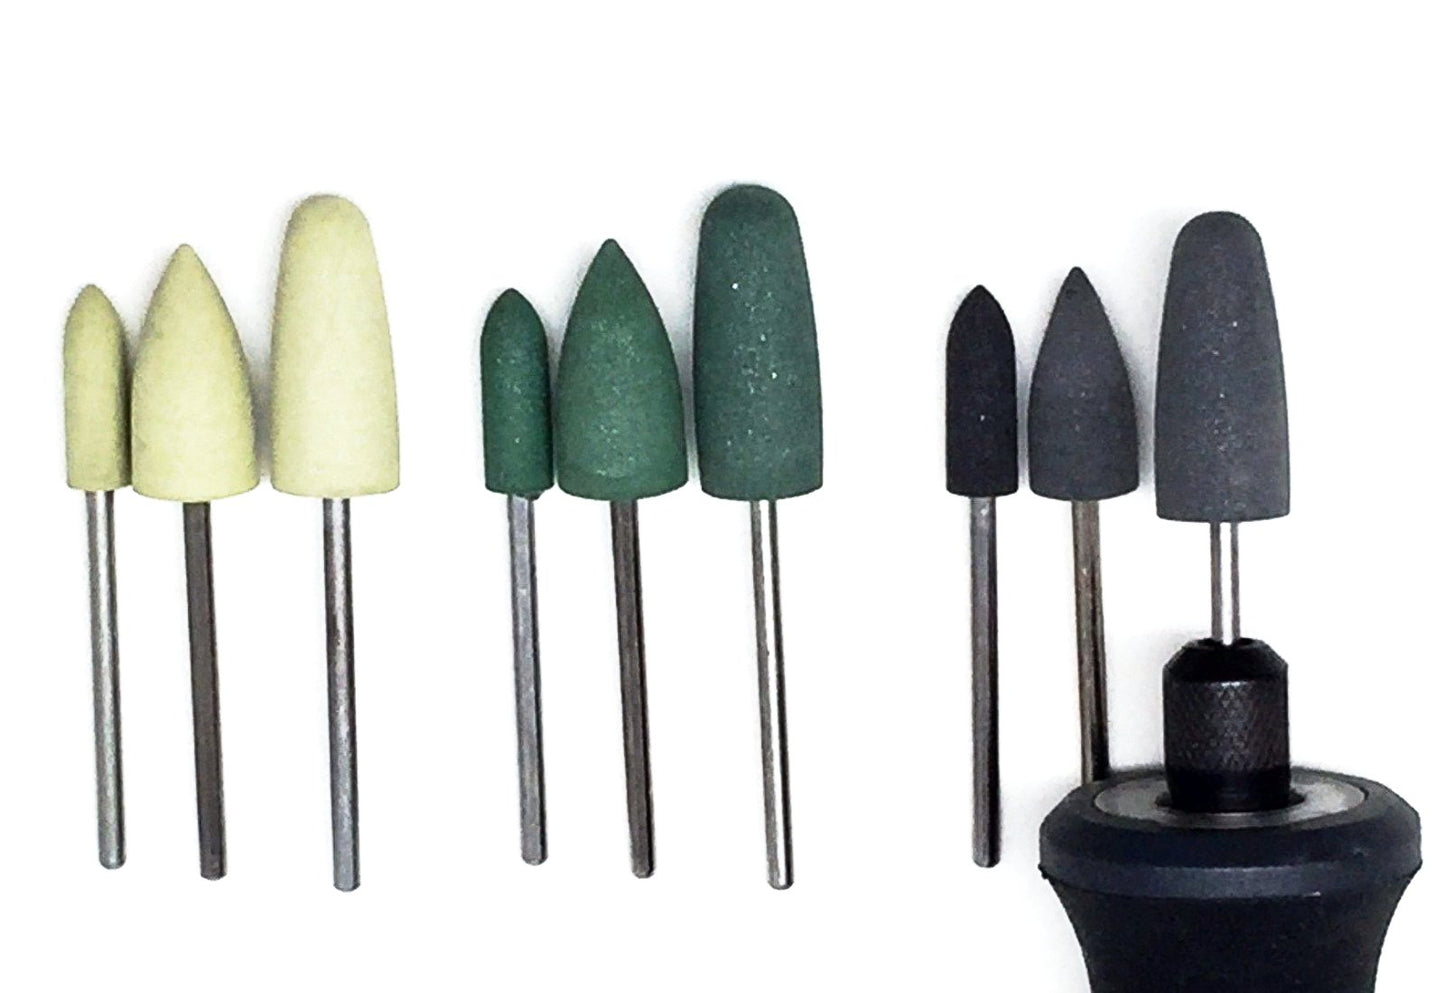 Diamond Rubber Polisher Bullet Set (9 piece set) - Great White North Pottery Supplies